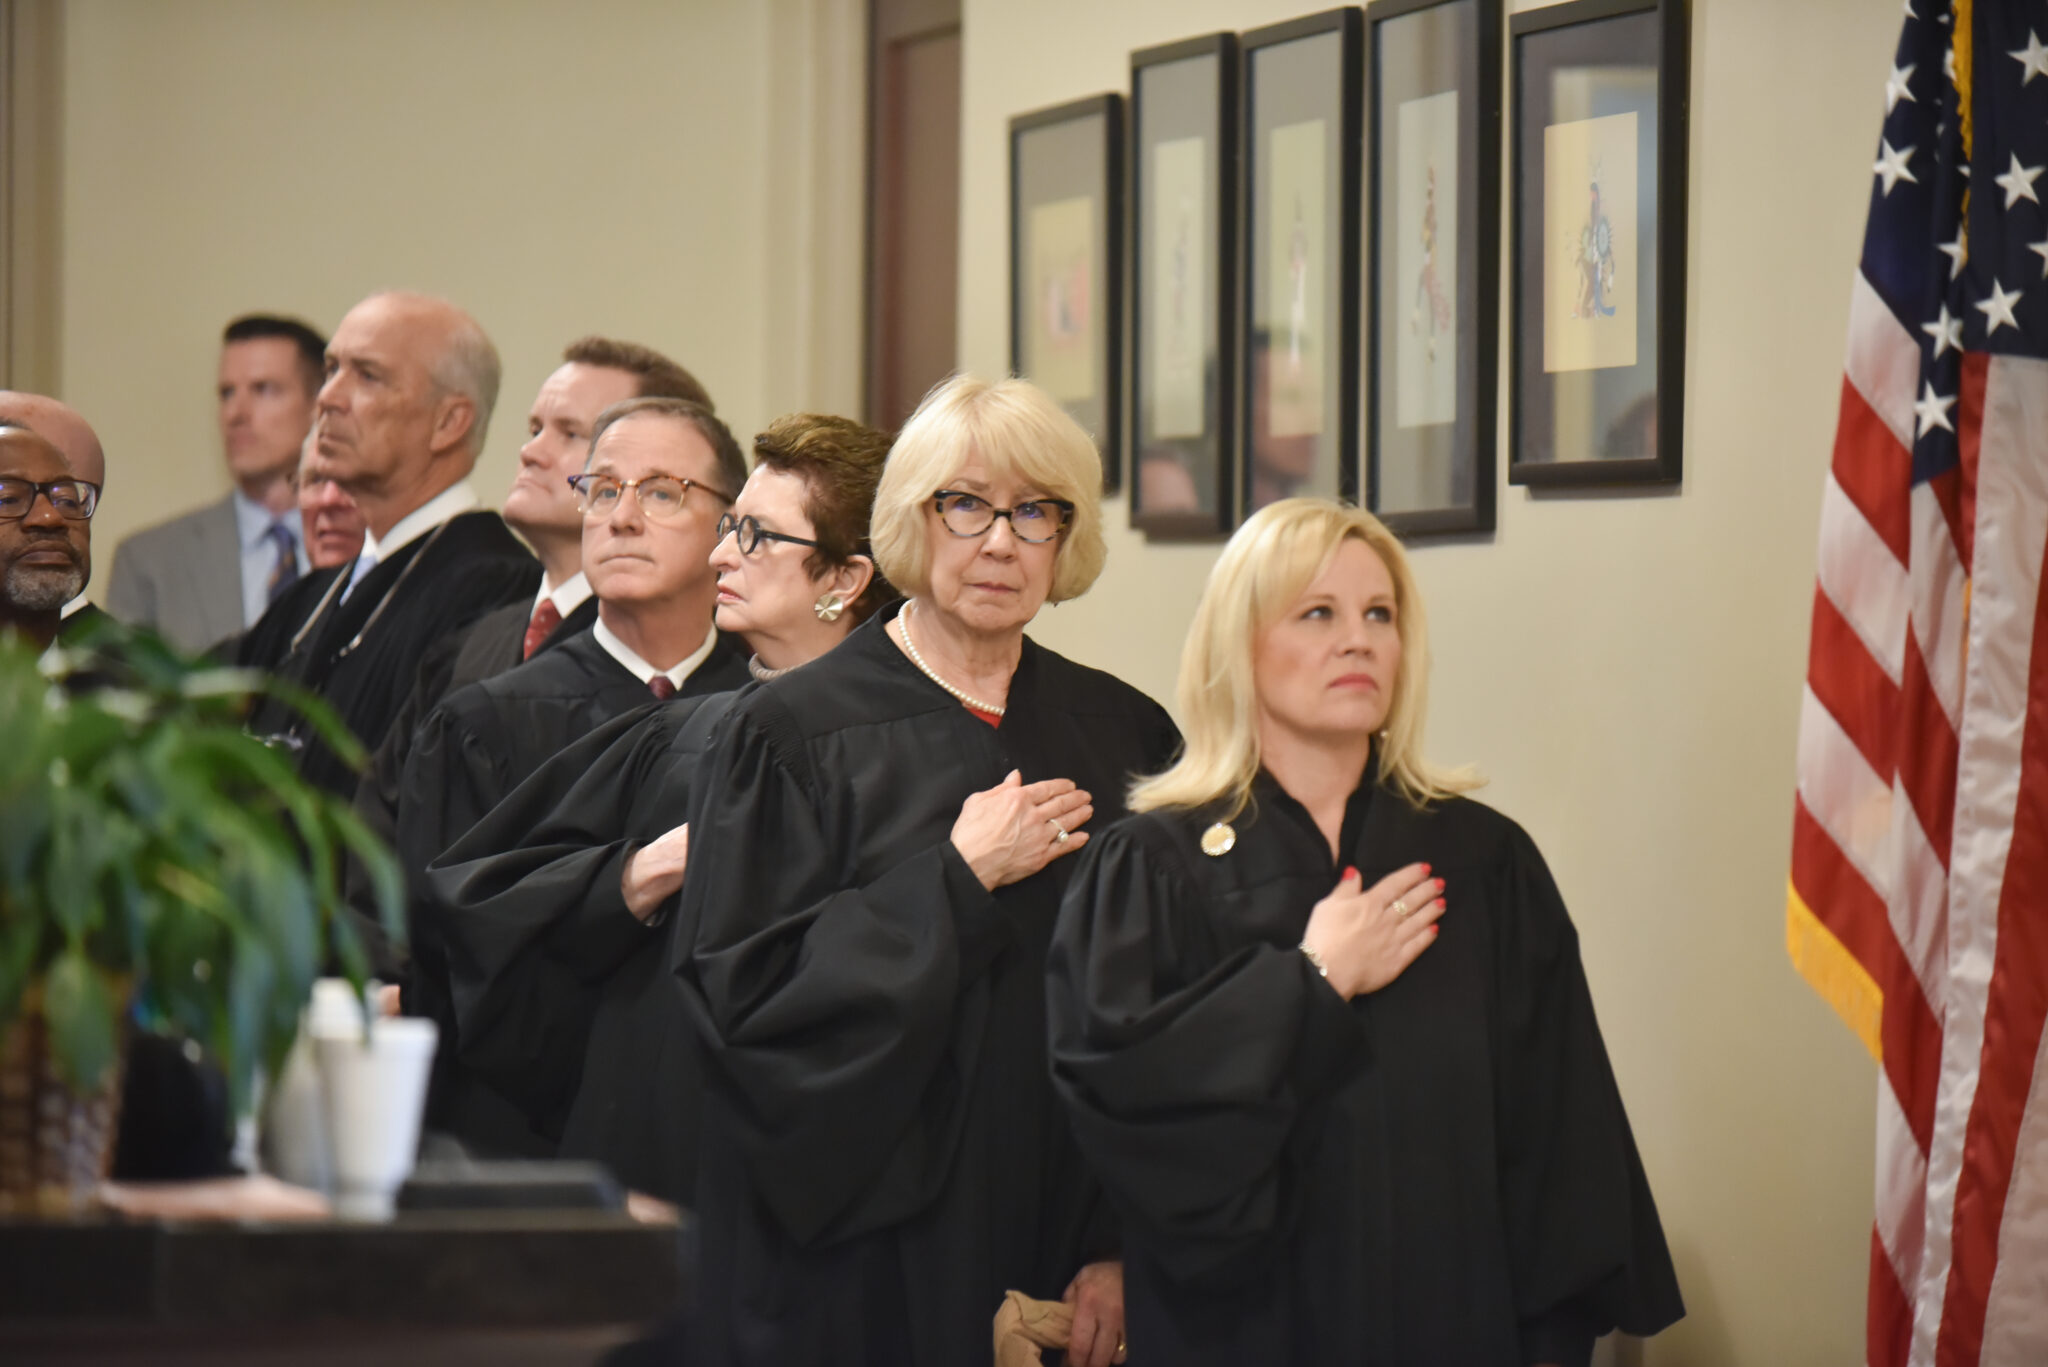 Oklahoma-strikes-down-religious-charter-school: Several people in black judge's robes stand at attention on interior steps with hand over heart facing American flag